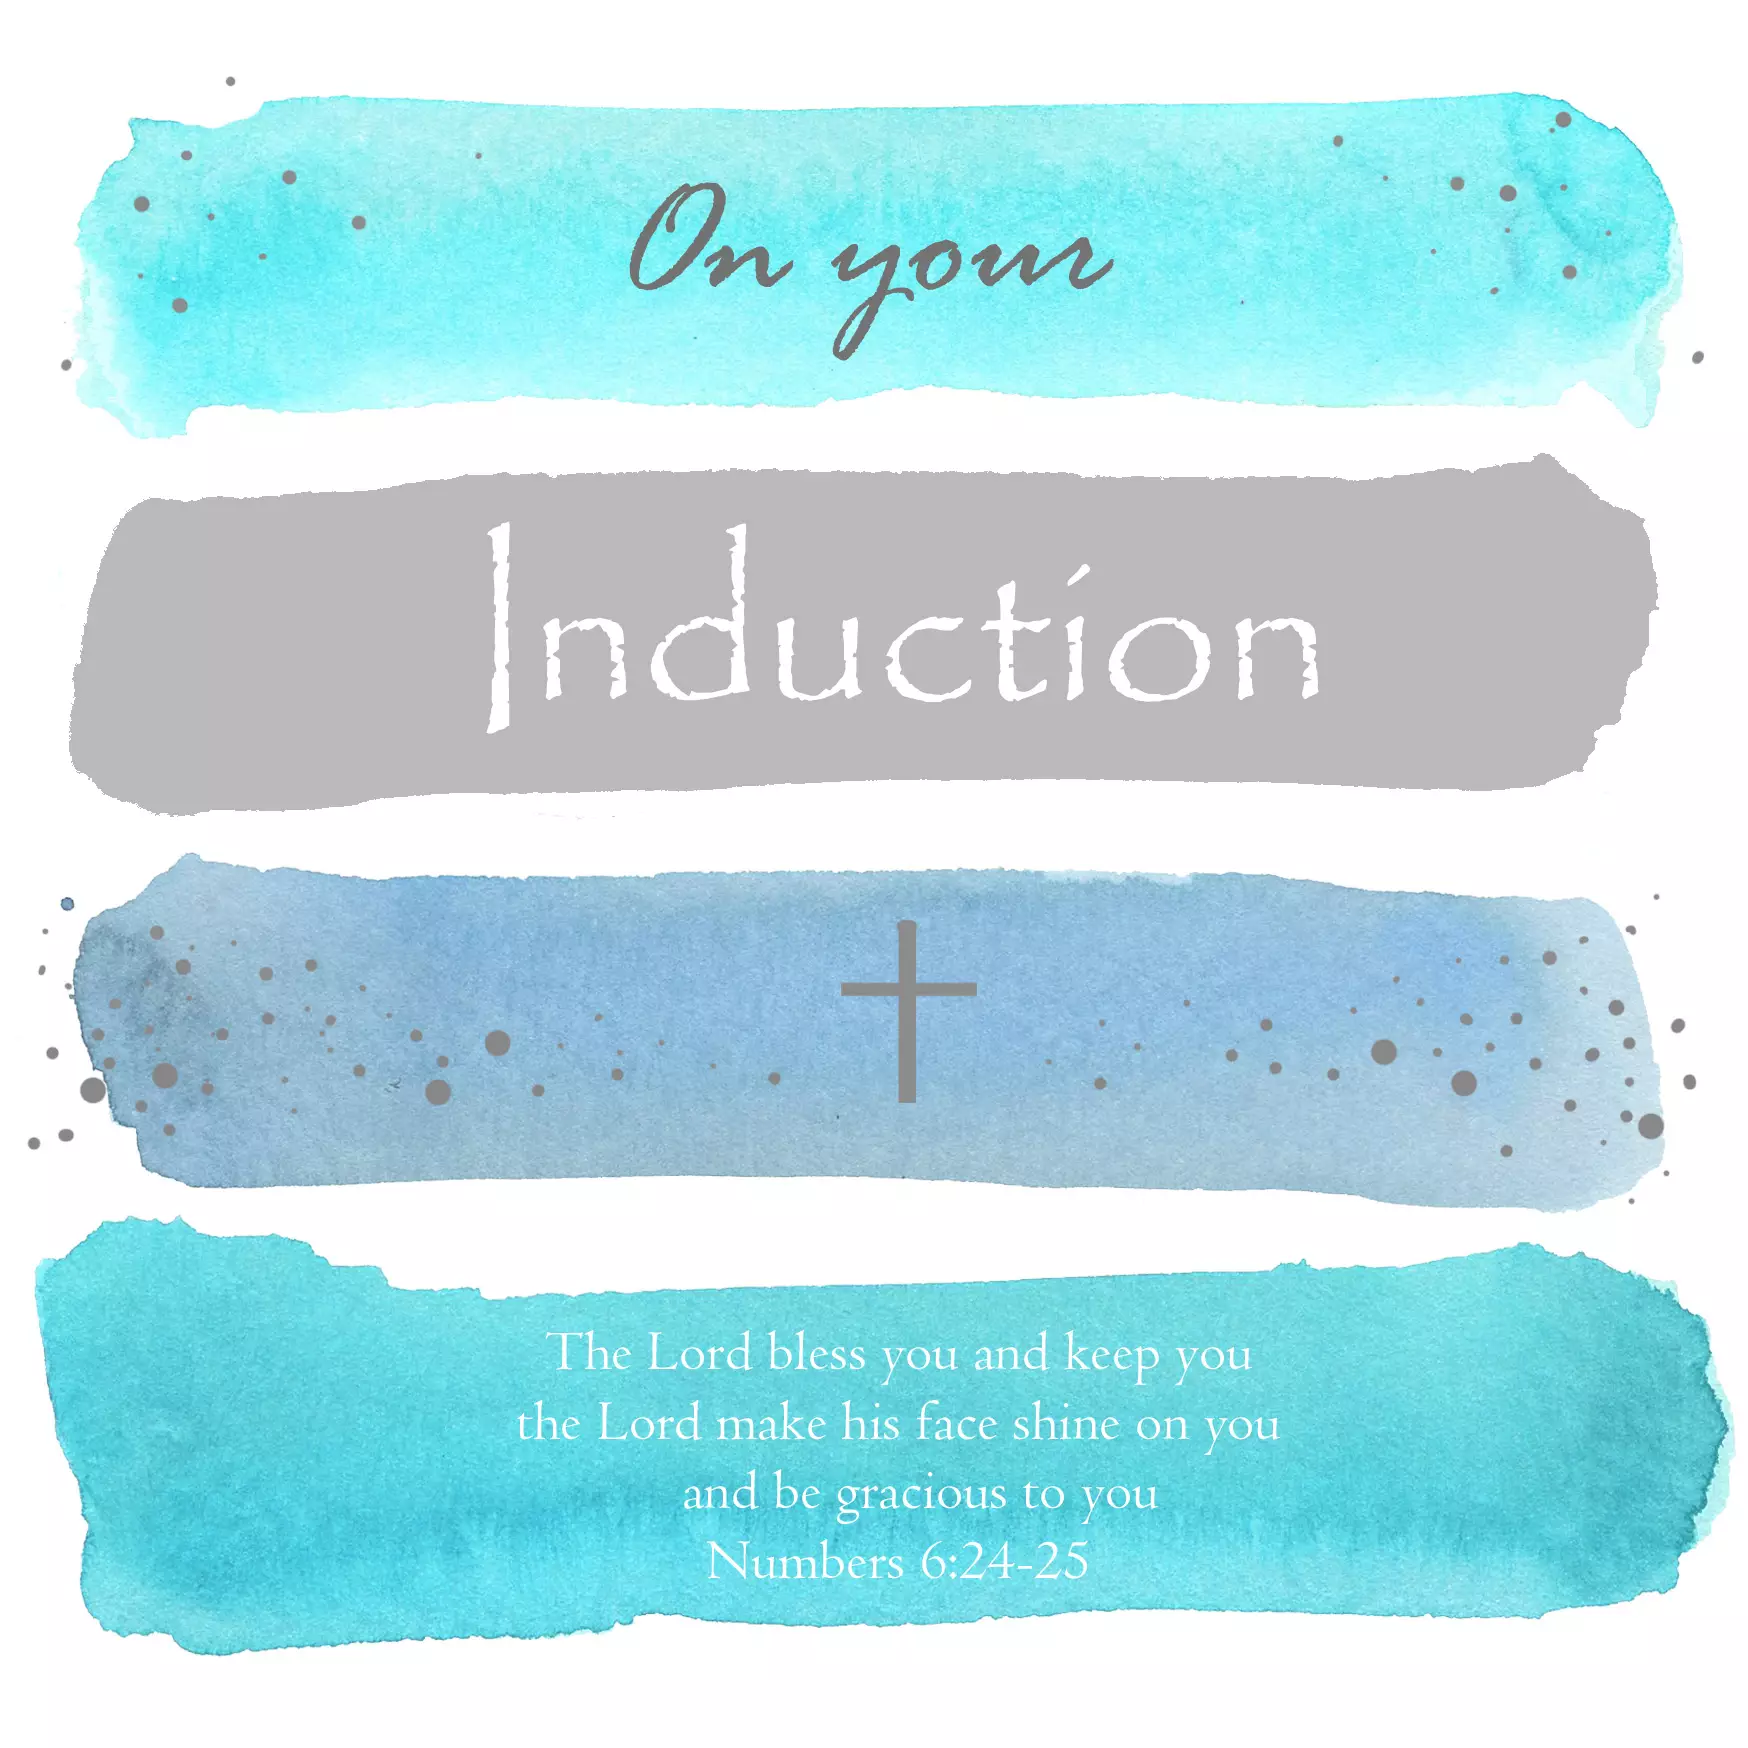 Induction Blessing Single Card